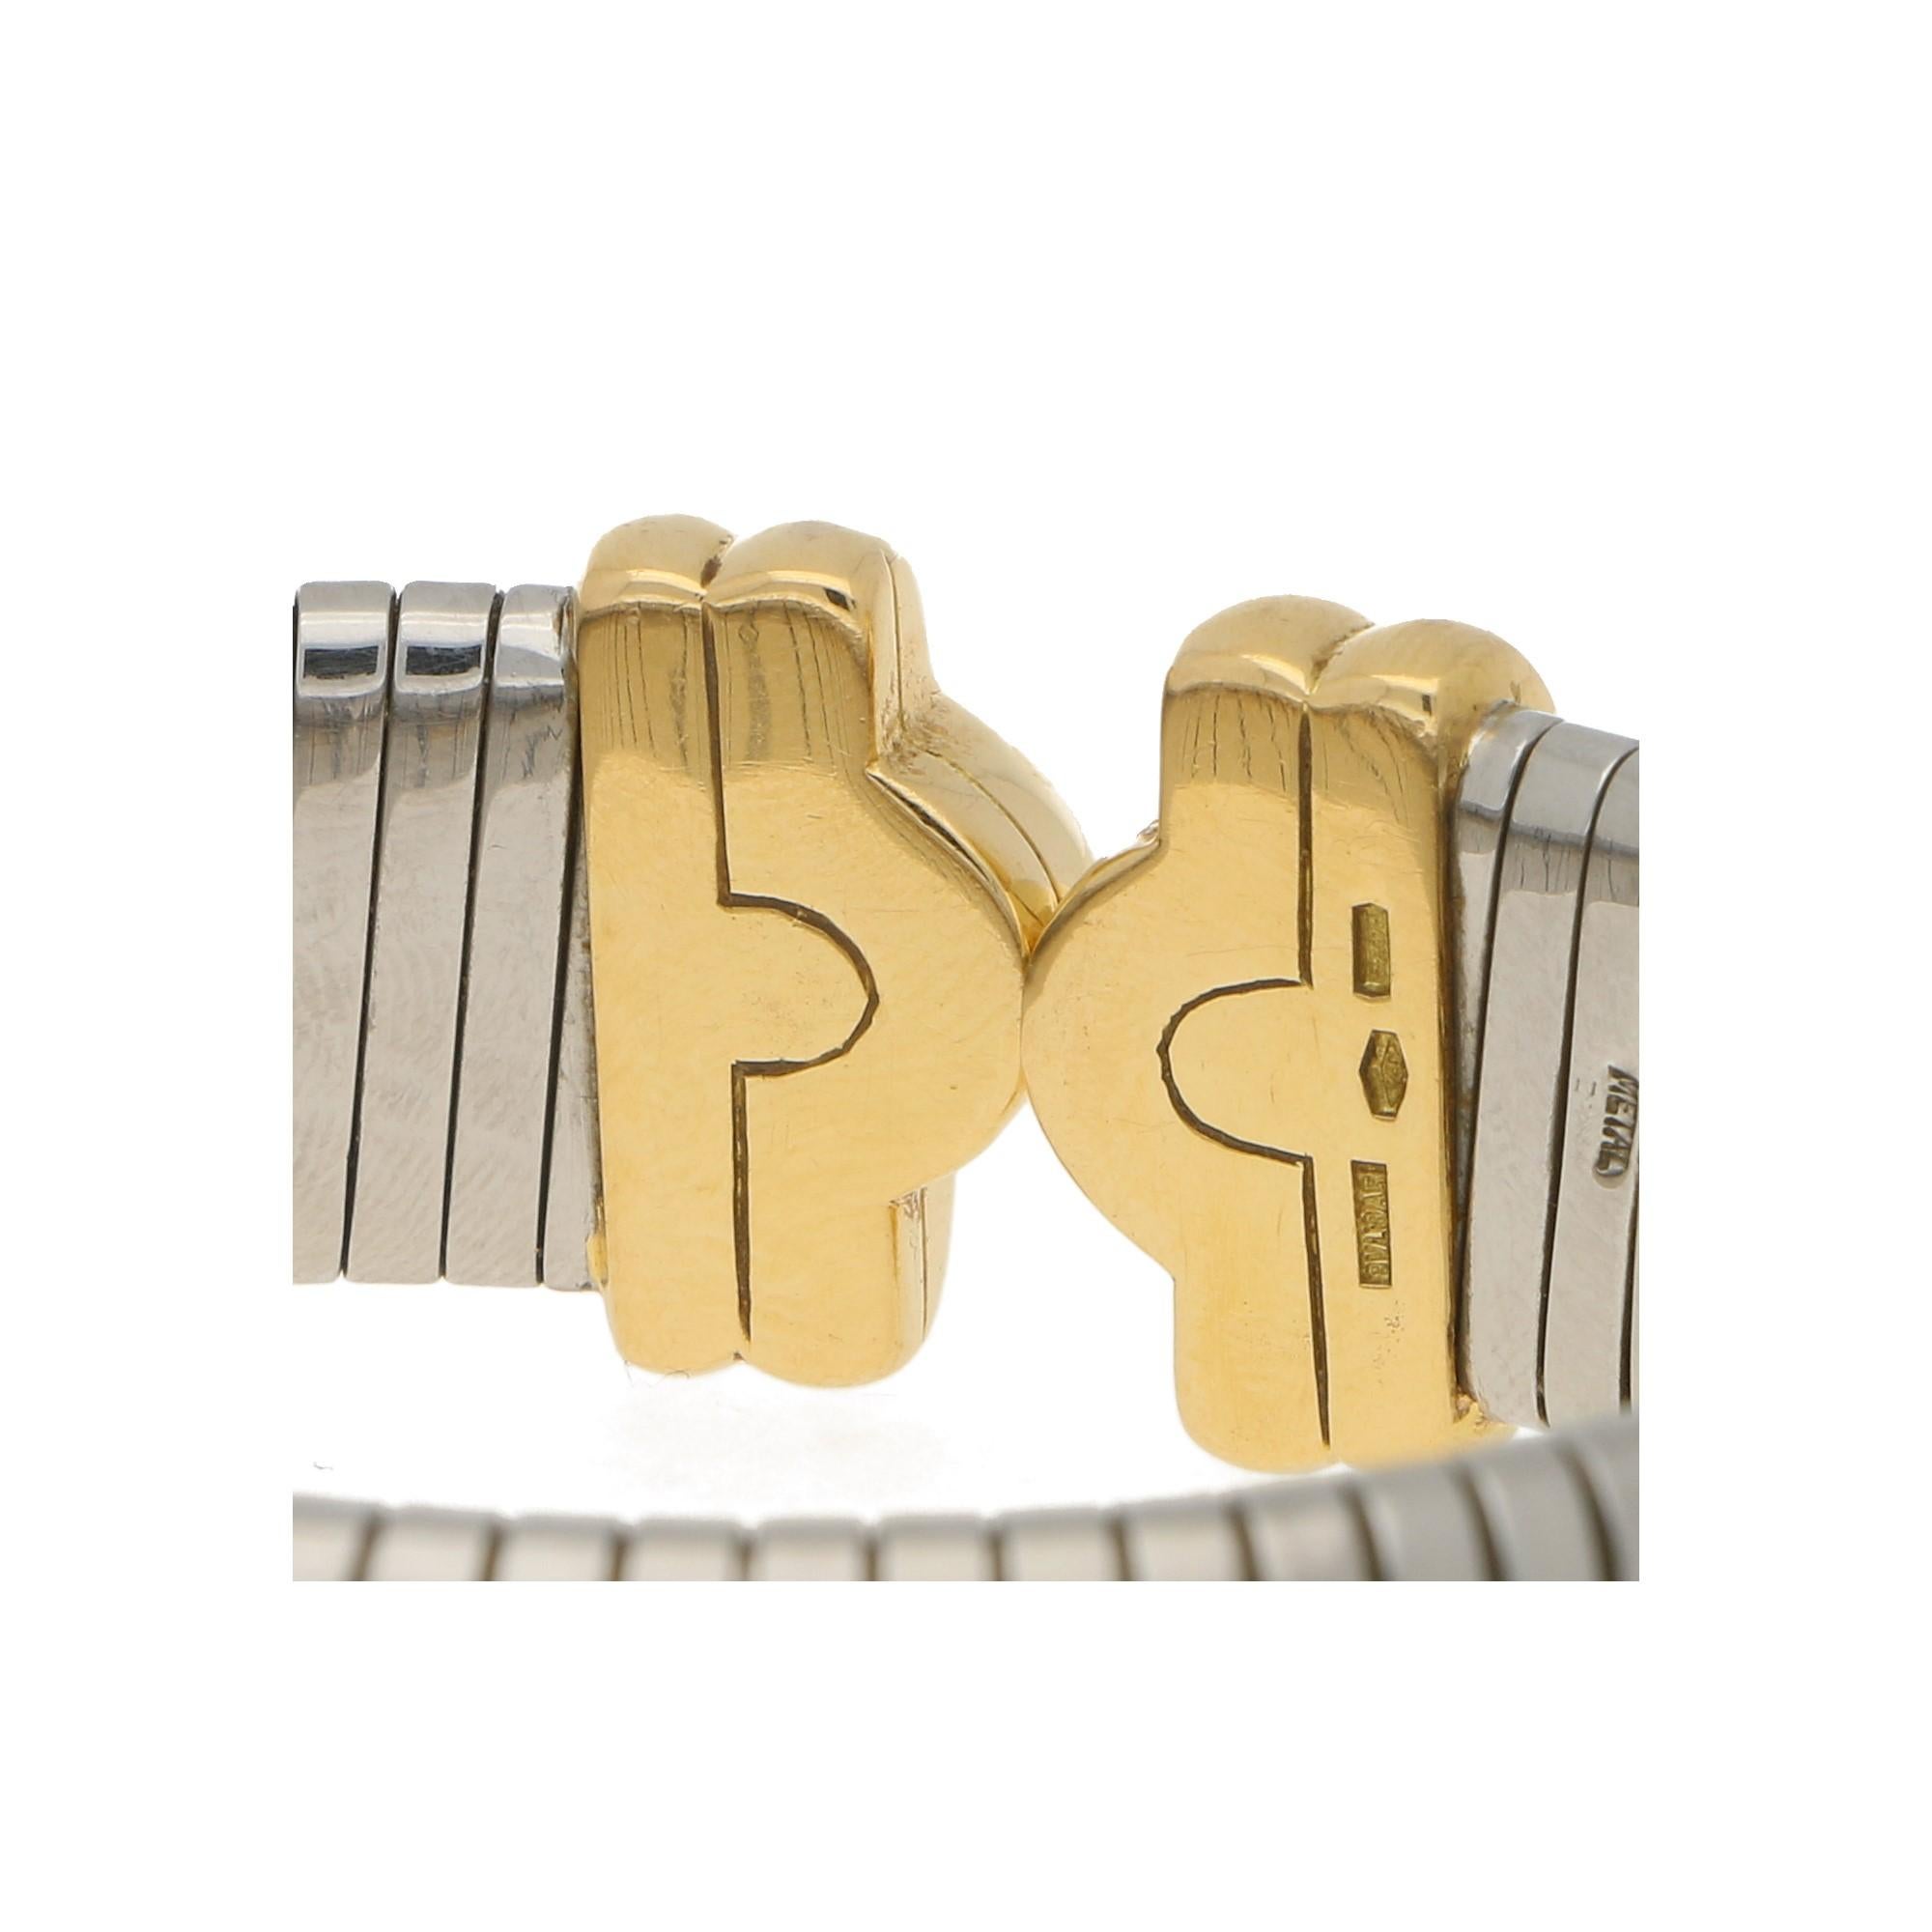 A vintage Bvlgari Tubogas bangle bracelet in 18-karat yellow gold and stainless steel. From the brand's Parentesi collection, the bracelet is designed as a springy flat snake-link stainless steel bangle with Tubogas inspiration, leading to solid